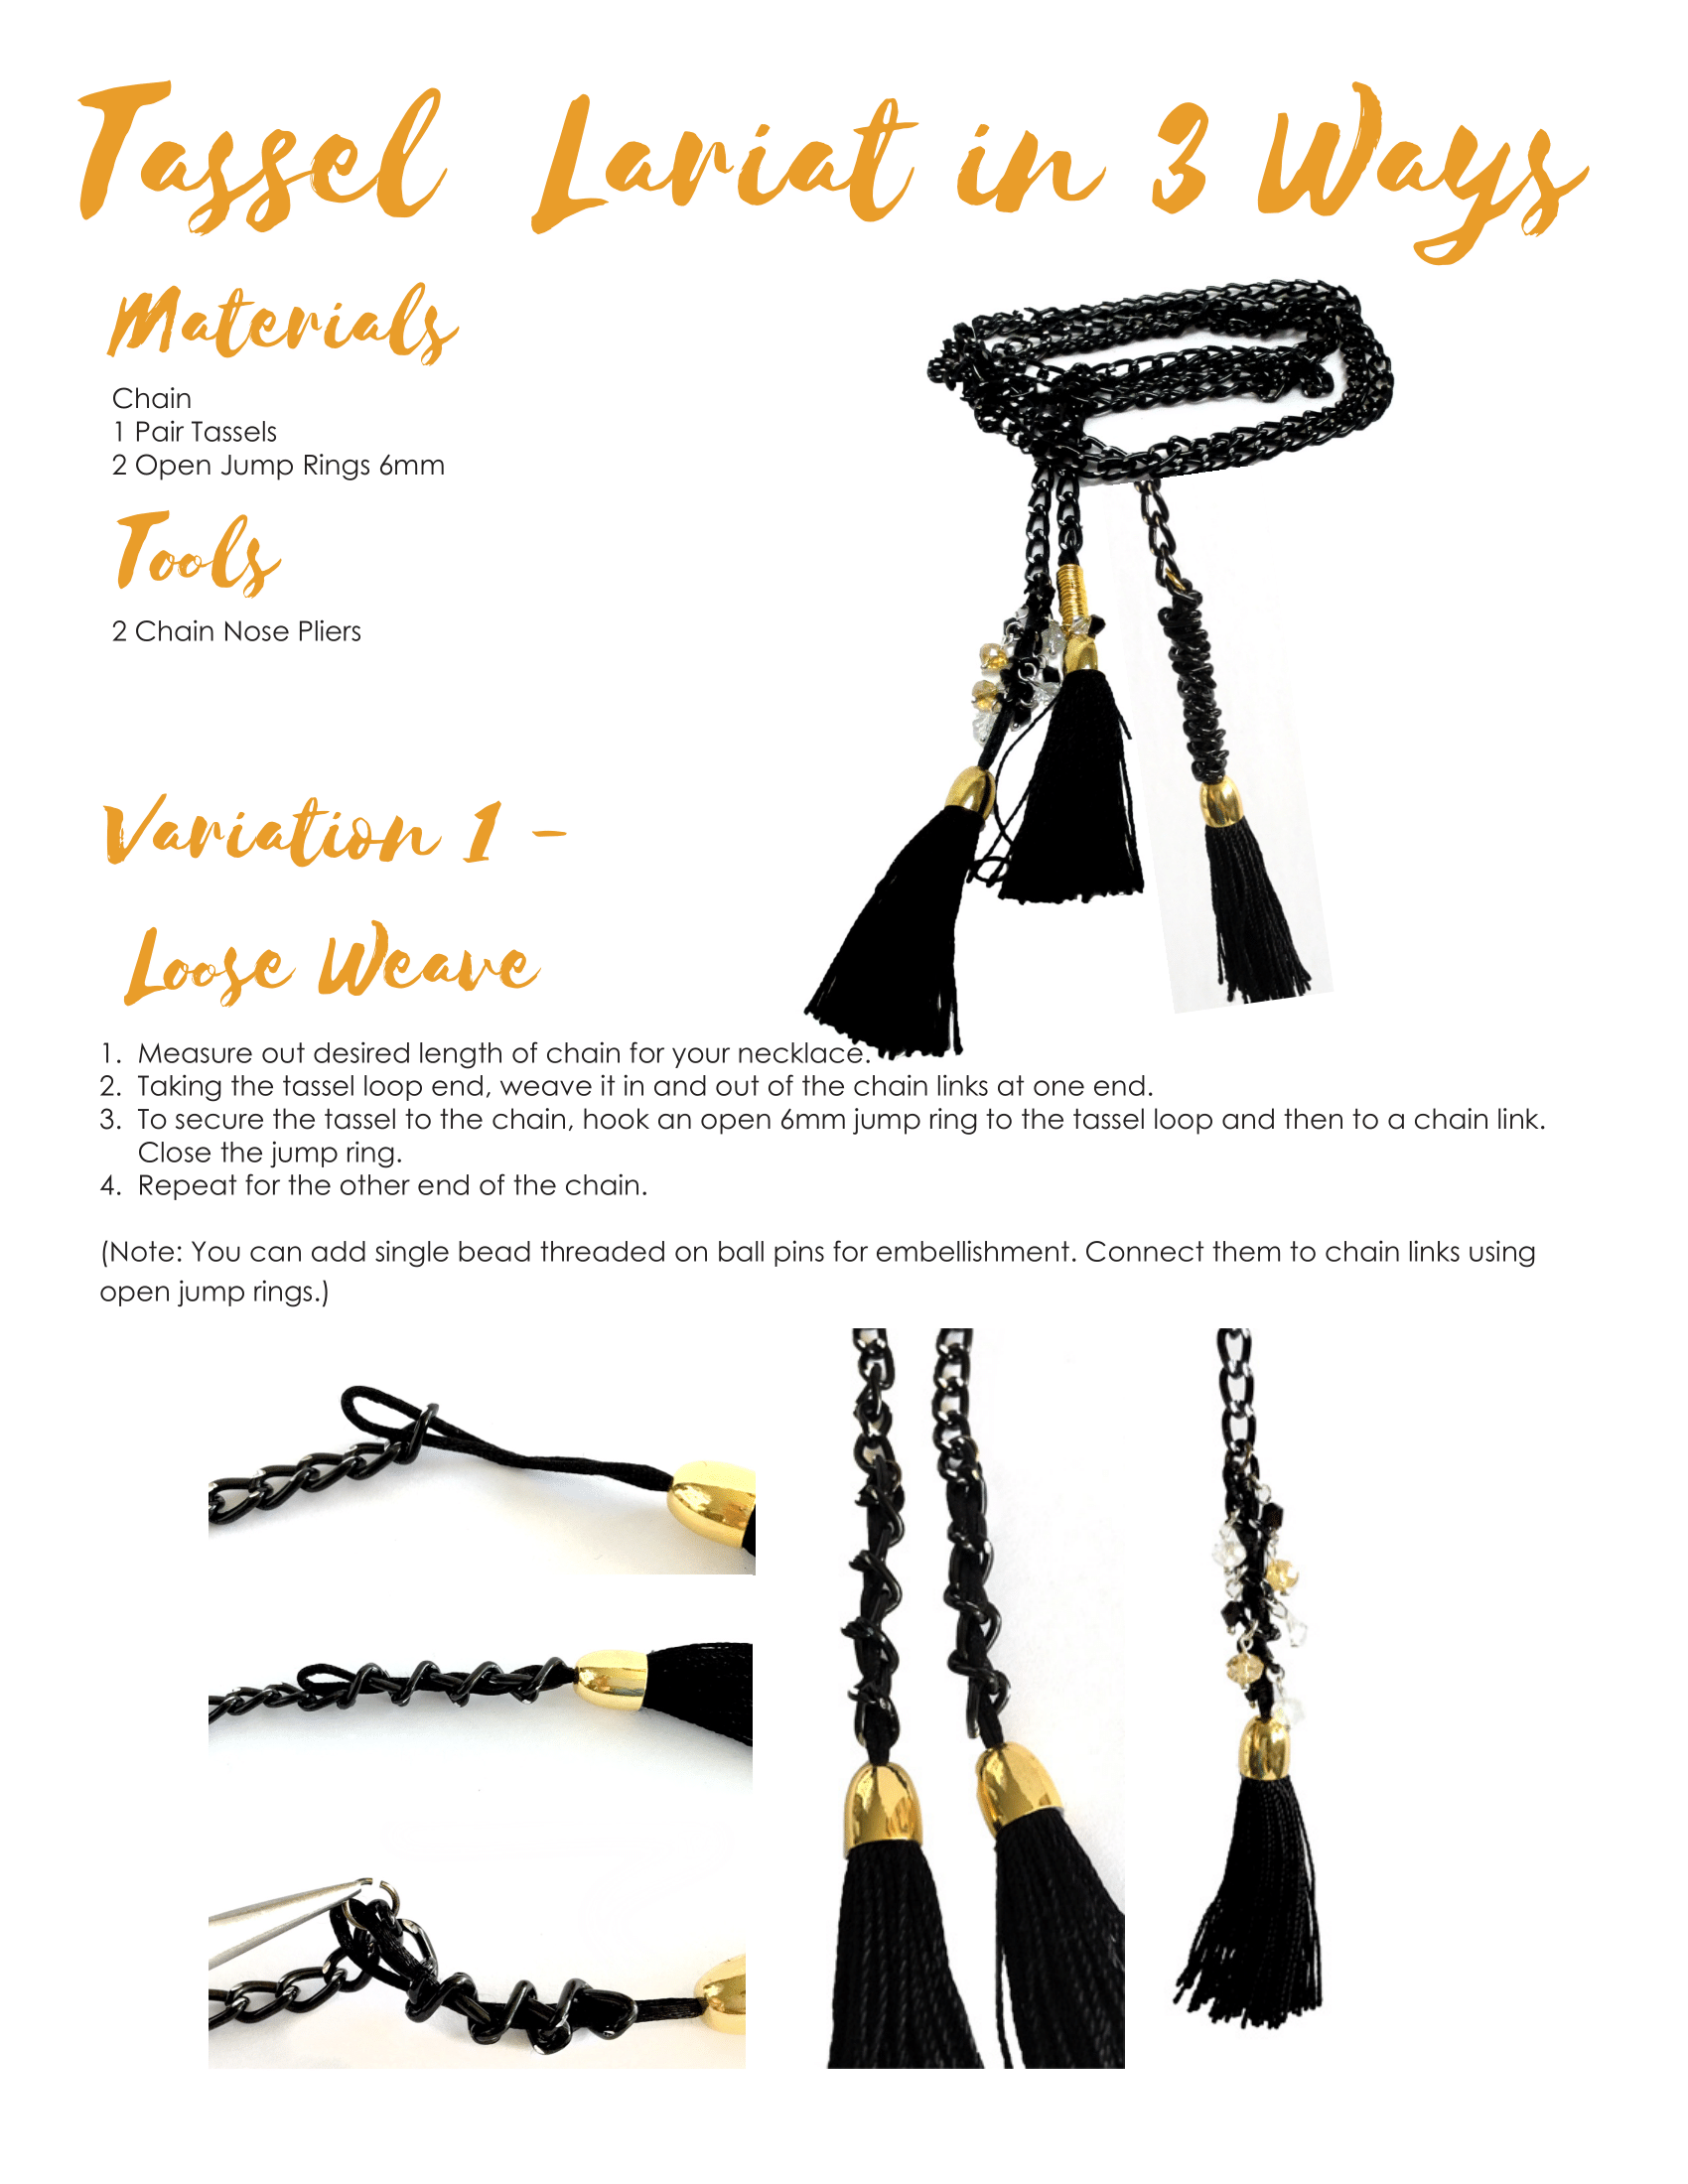 Materials and steps to create your losse weave tassel